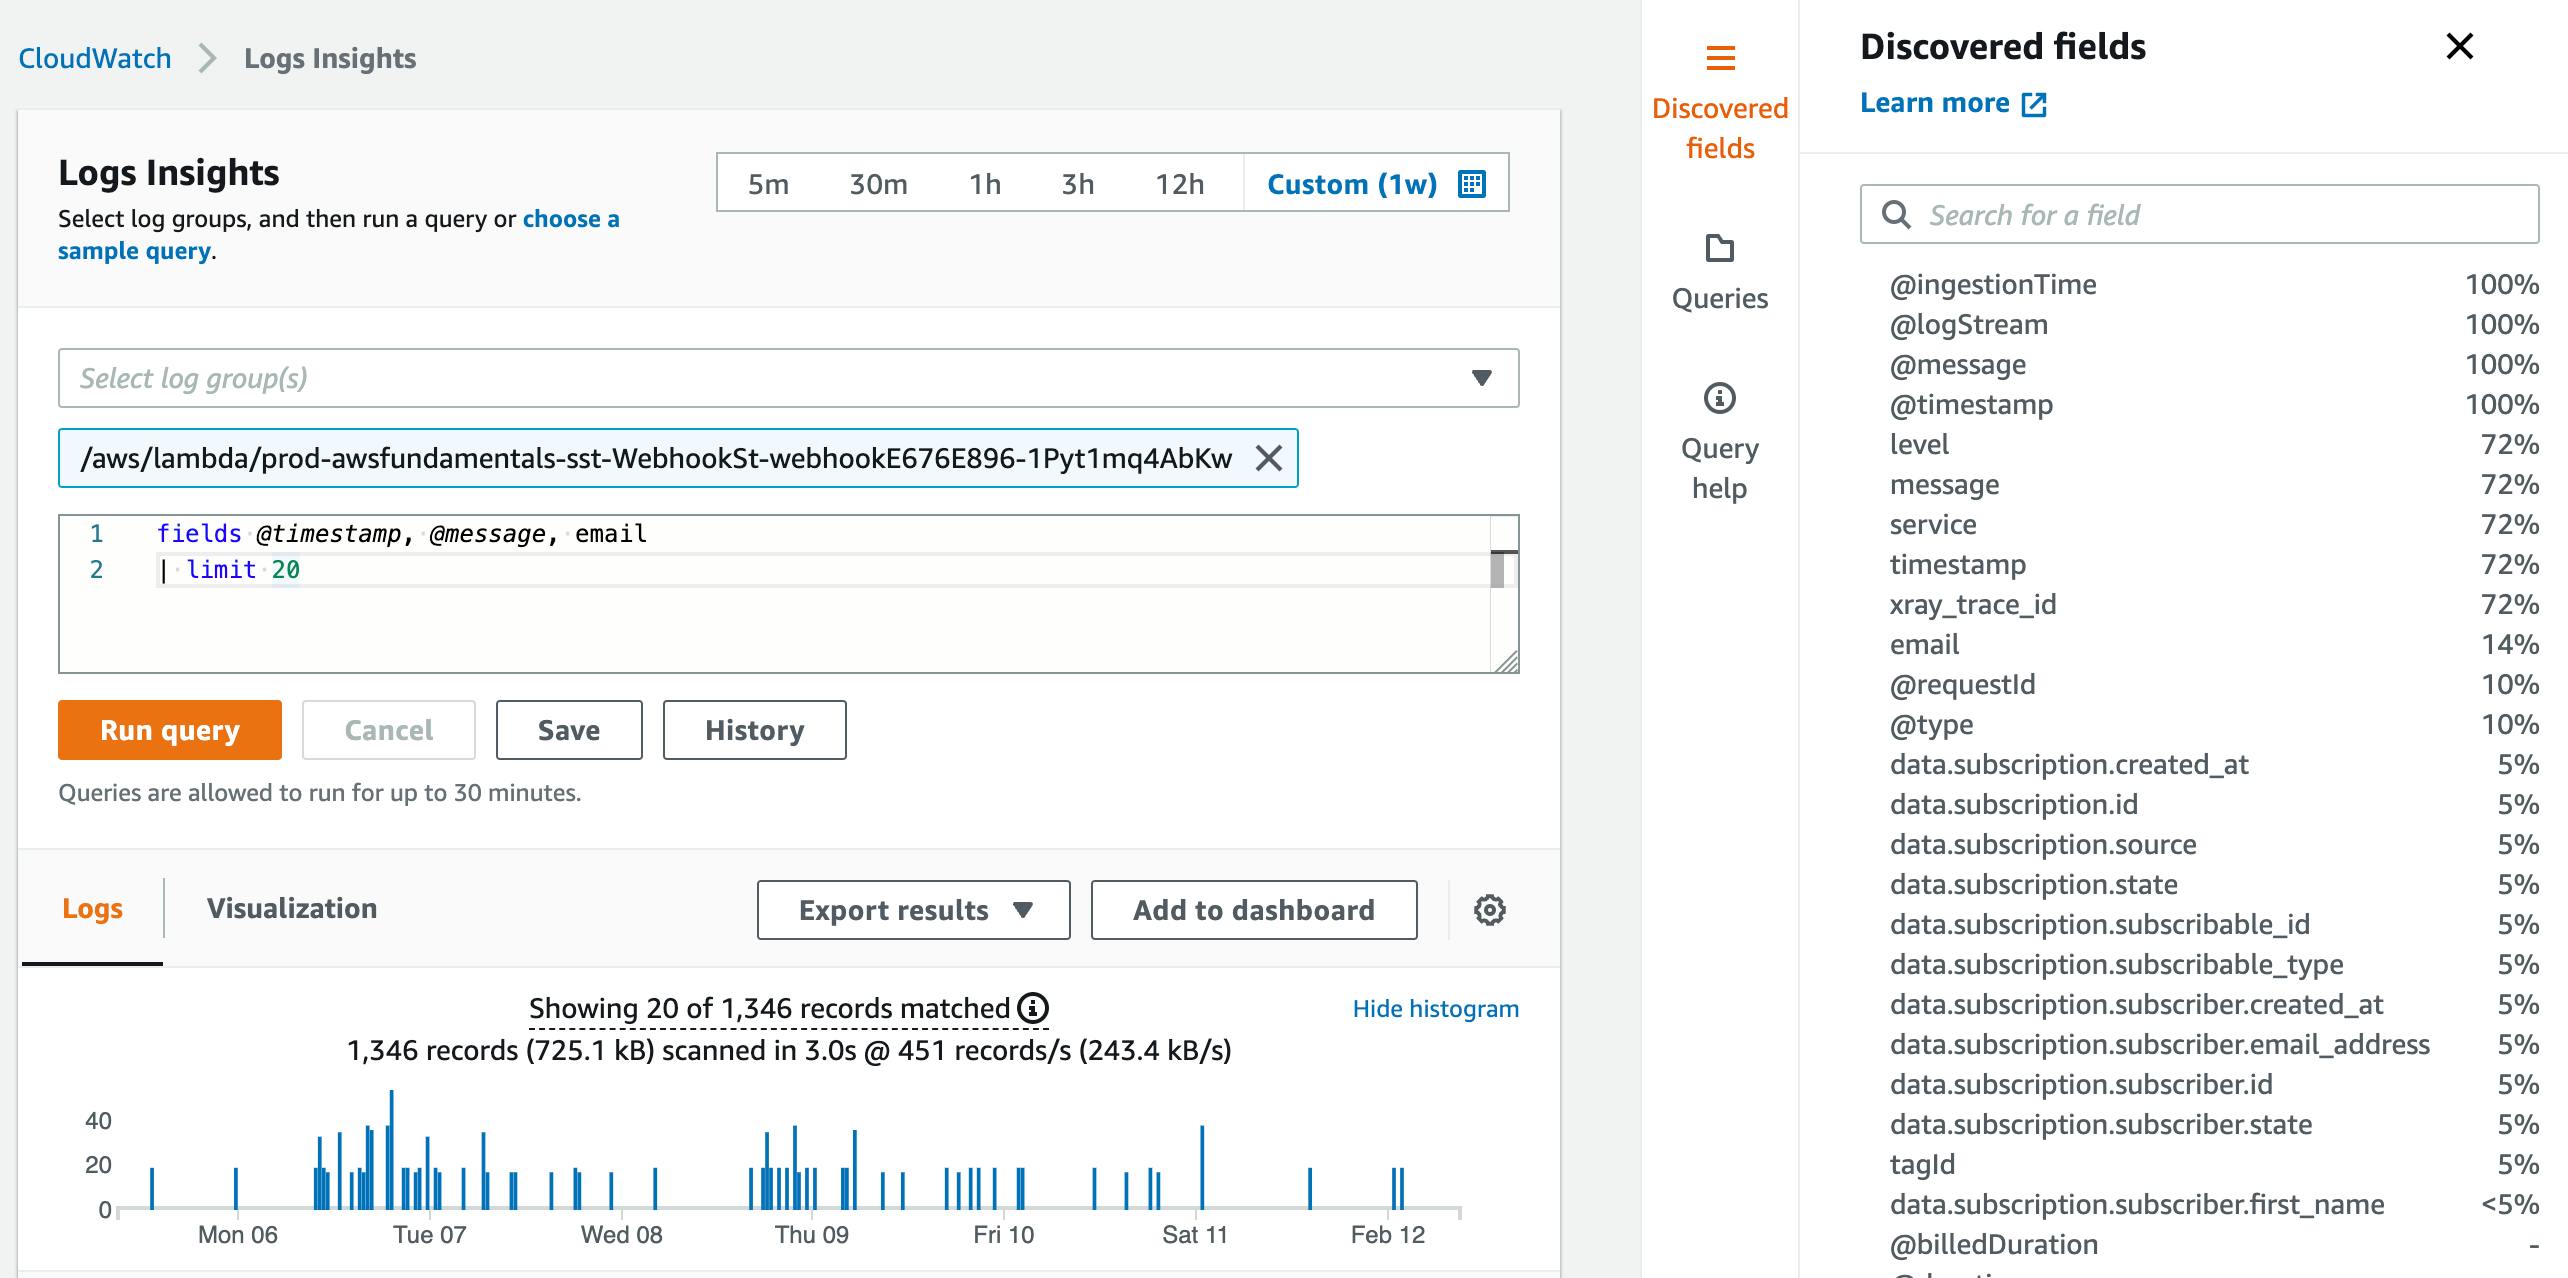 The UI of CloudWatch Log Insights